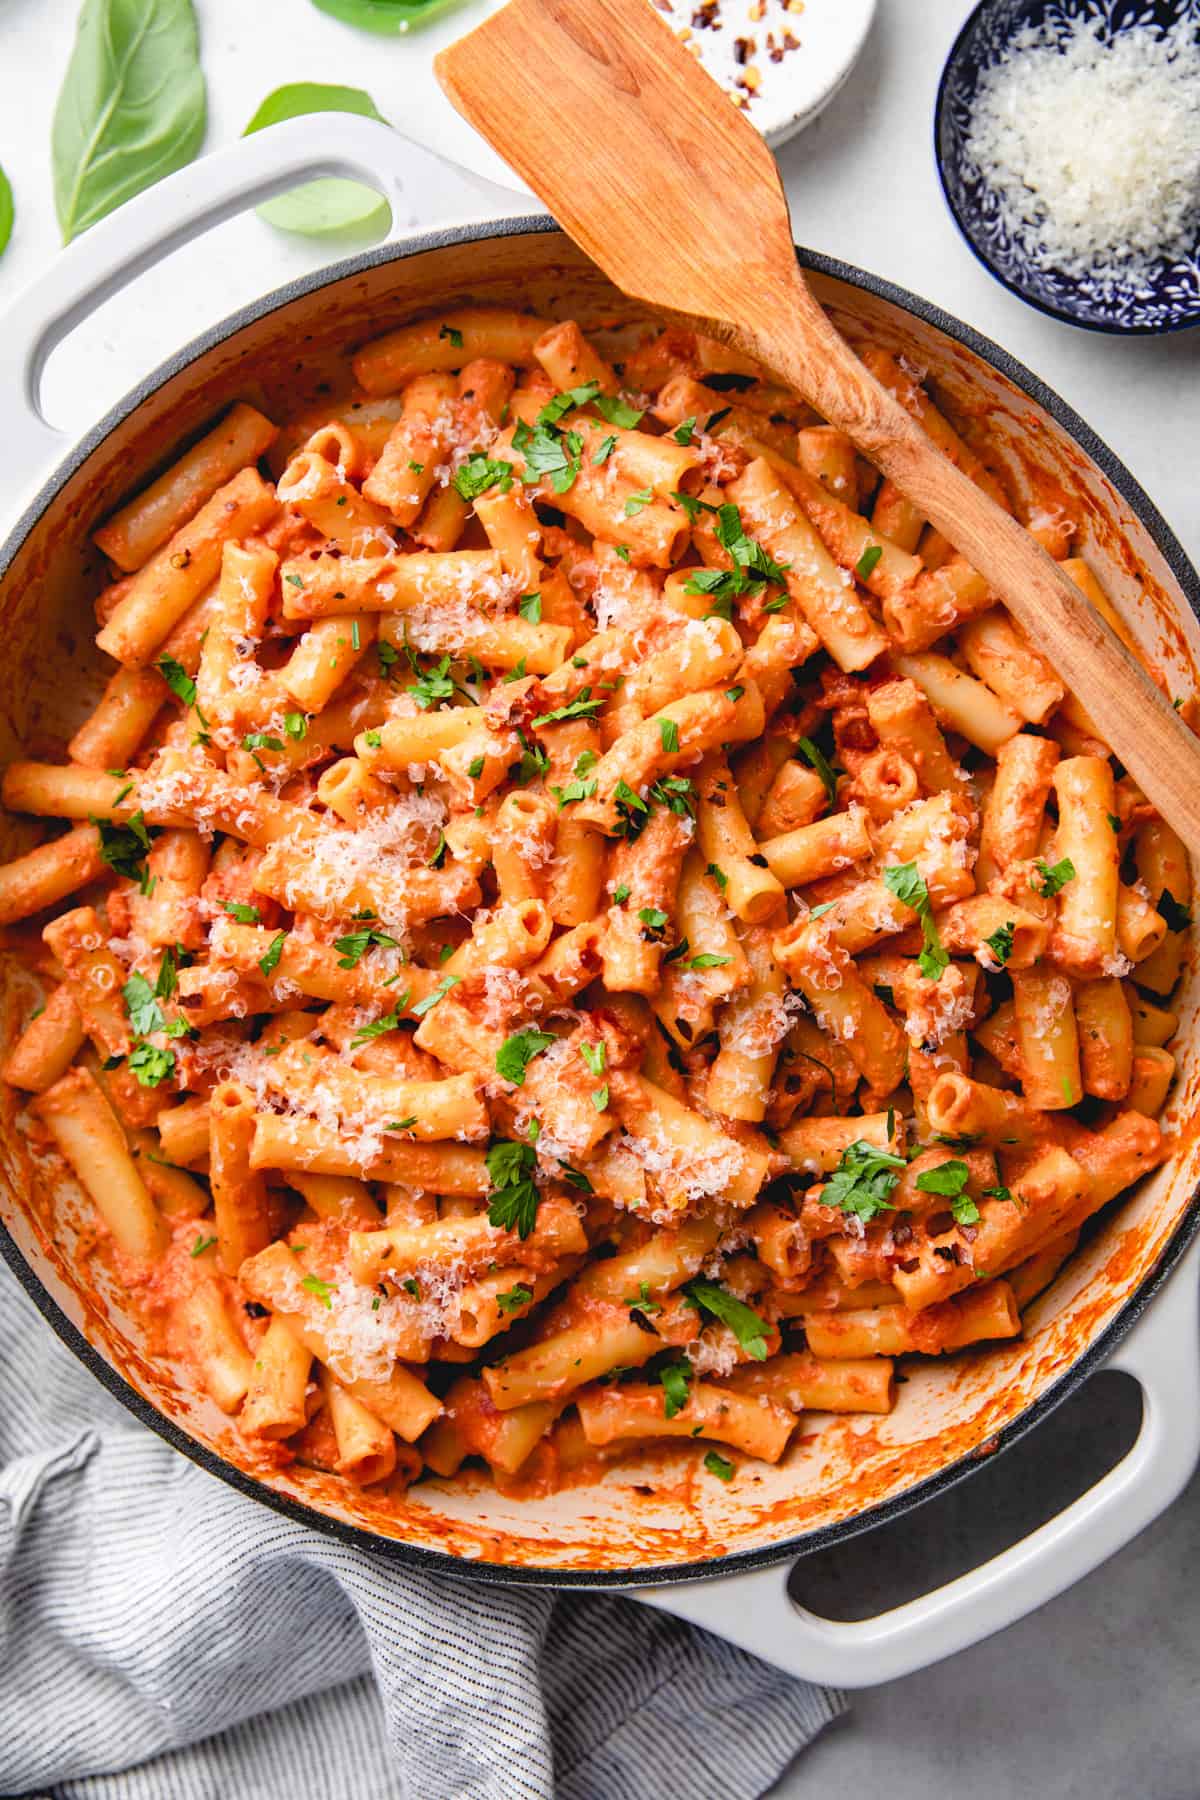 Pasta, coated in pink sauce, in a skillet.